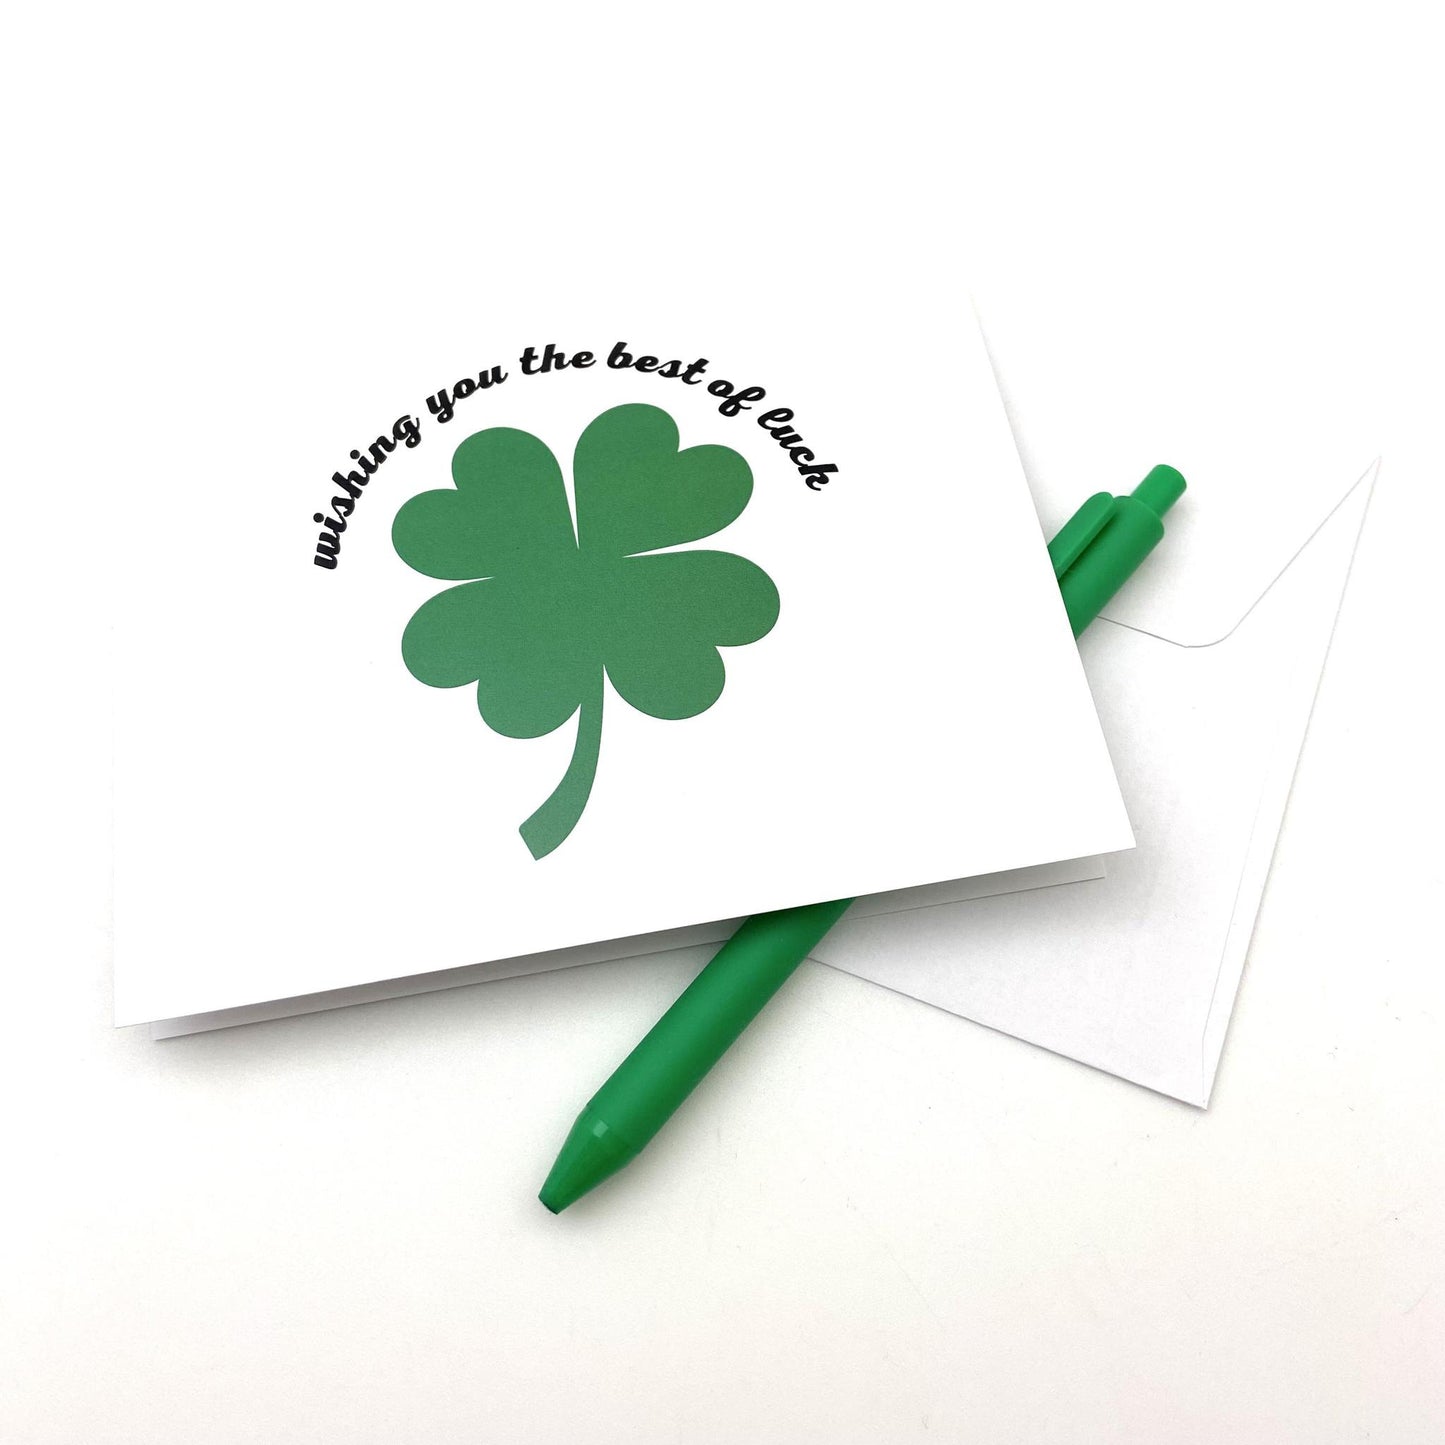 Card Set - "Wishing You the Best of Luck" - Pack of 10 - Printed